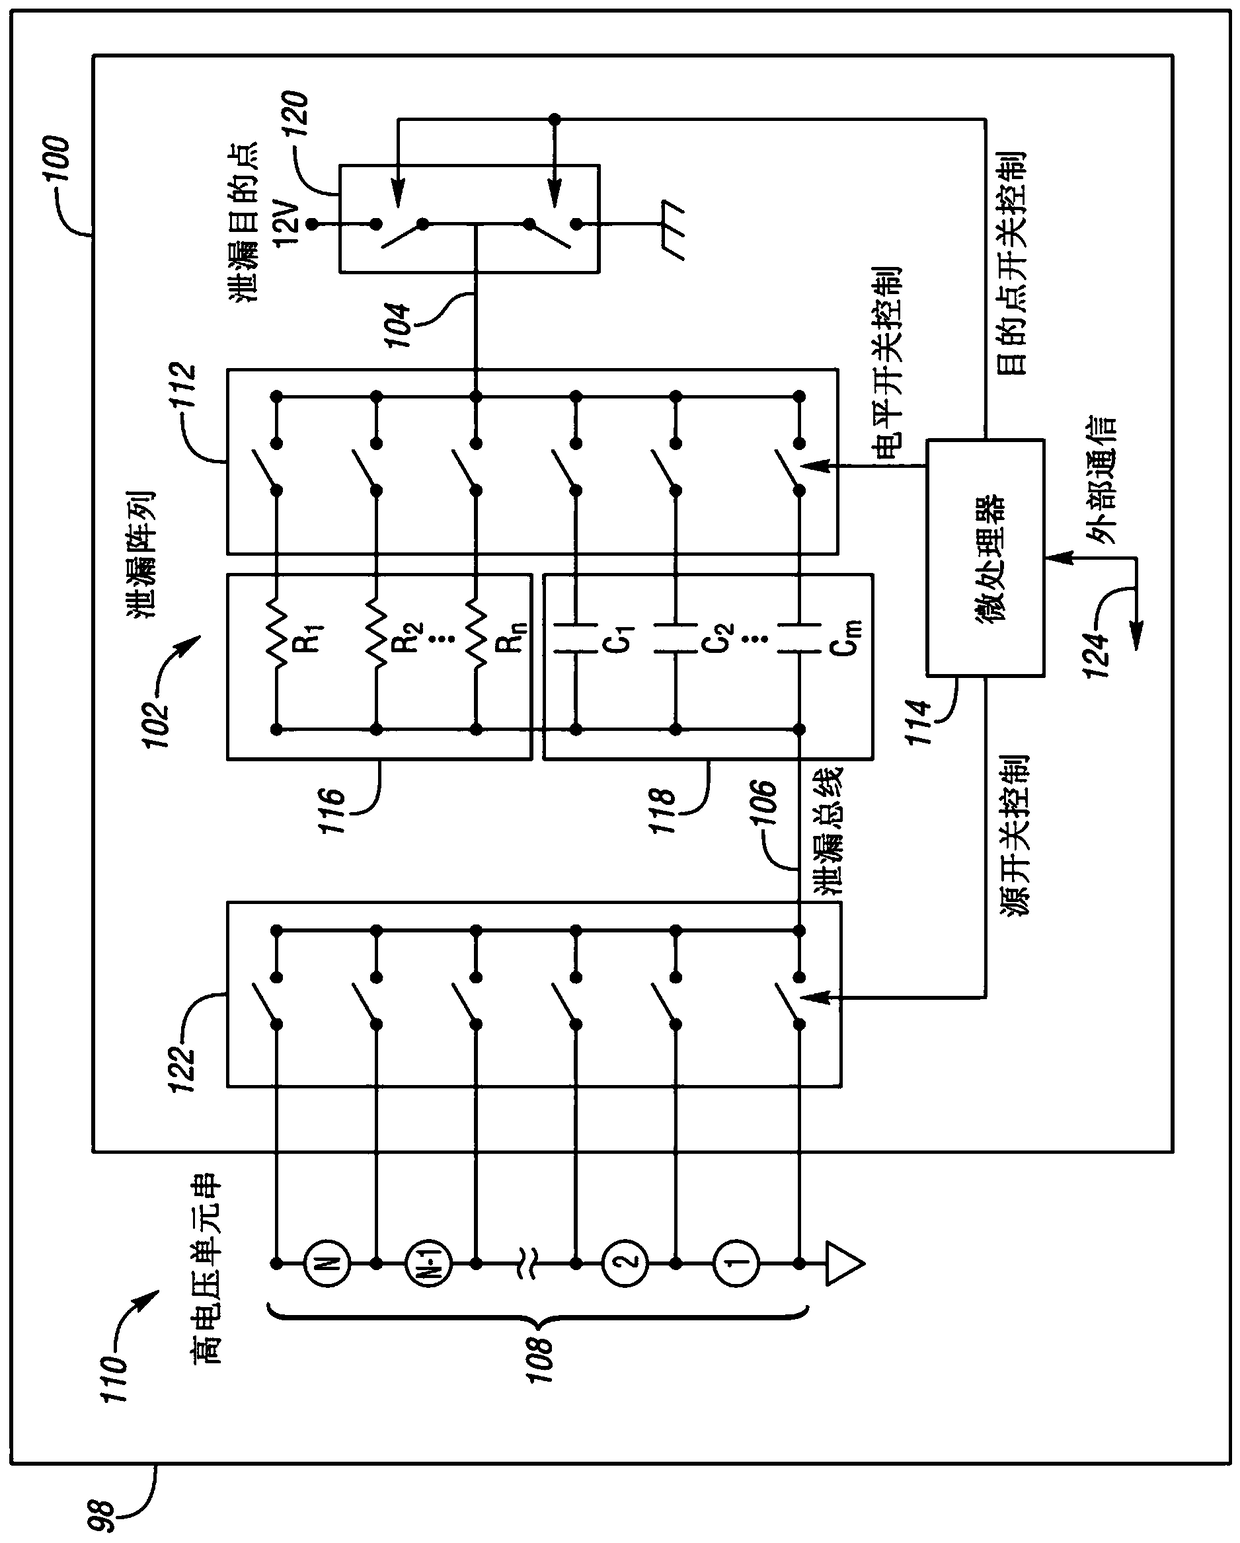 Isolation Monitor performance tools and methods for testing Isolation Monitors